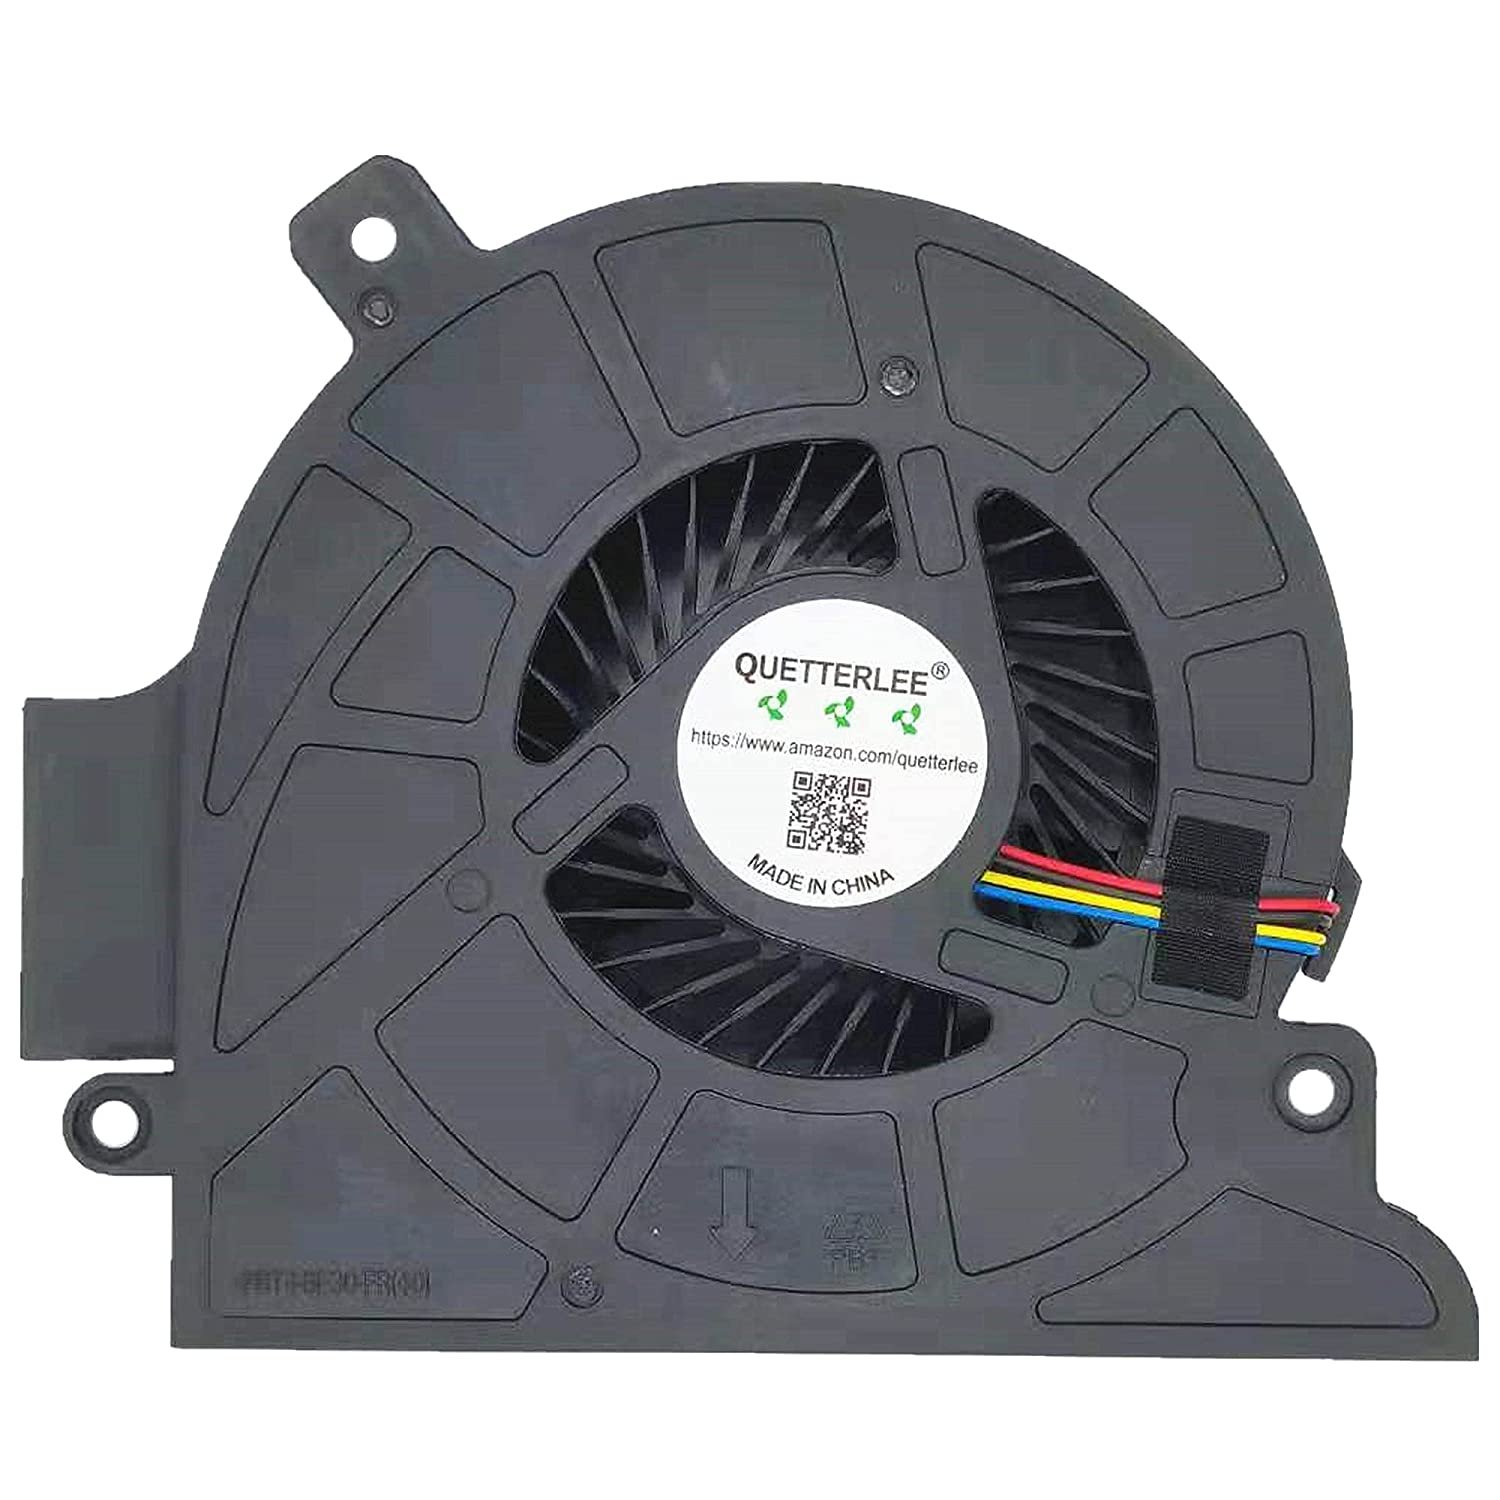 Replacement New Laptop Cpu Cooling Fan For Dell Optiplex 3240 3440 5250 7440 7450 Aio Series 0Mhv2